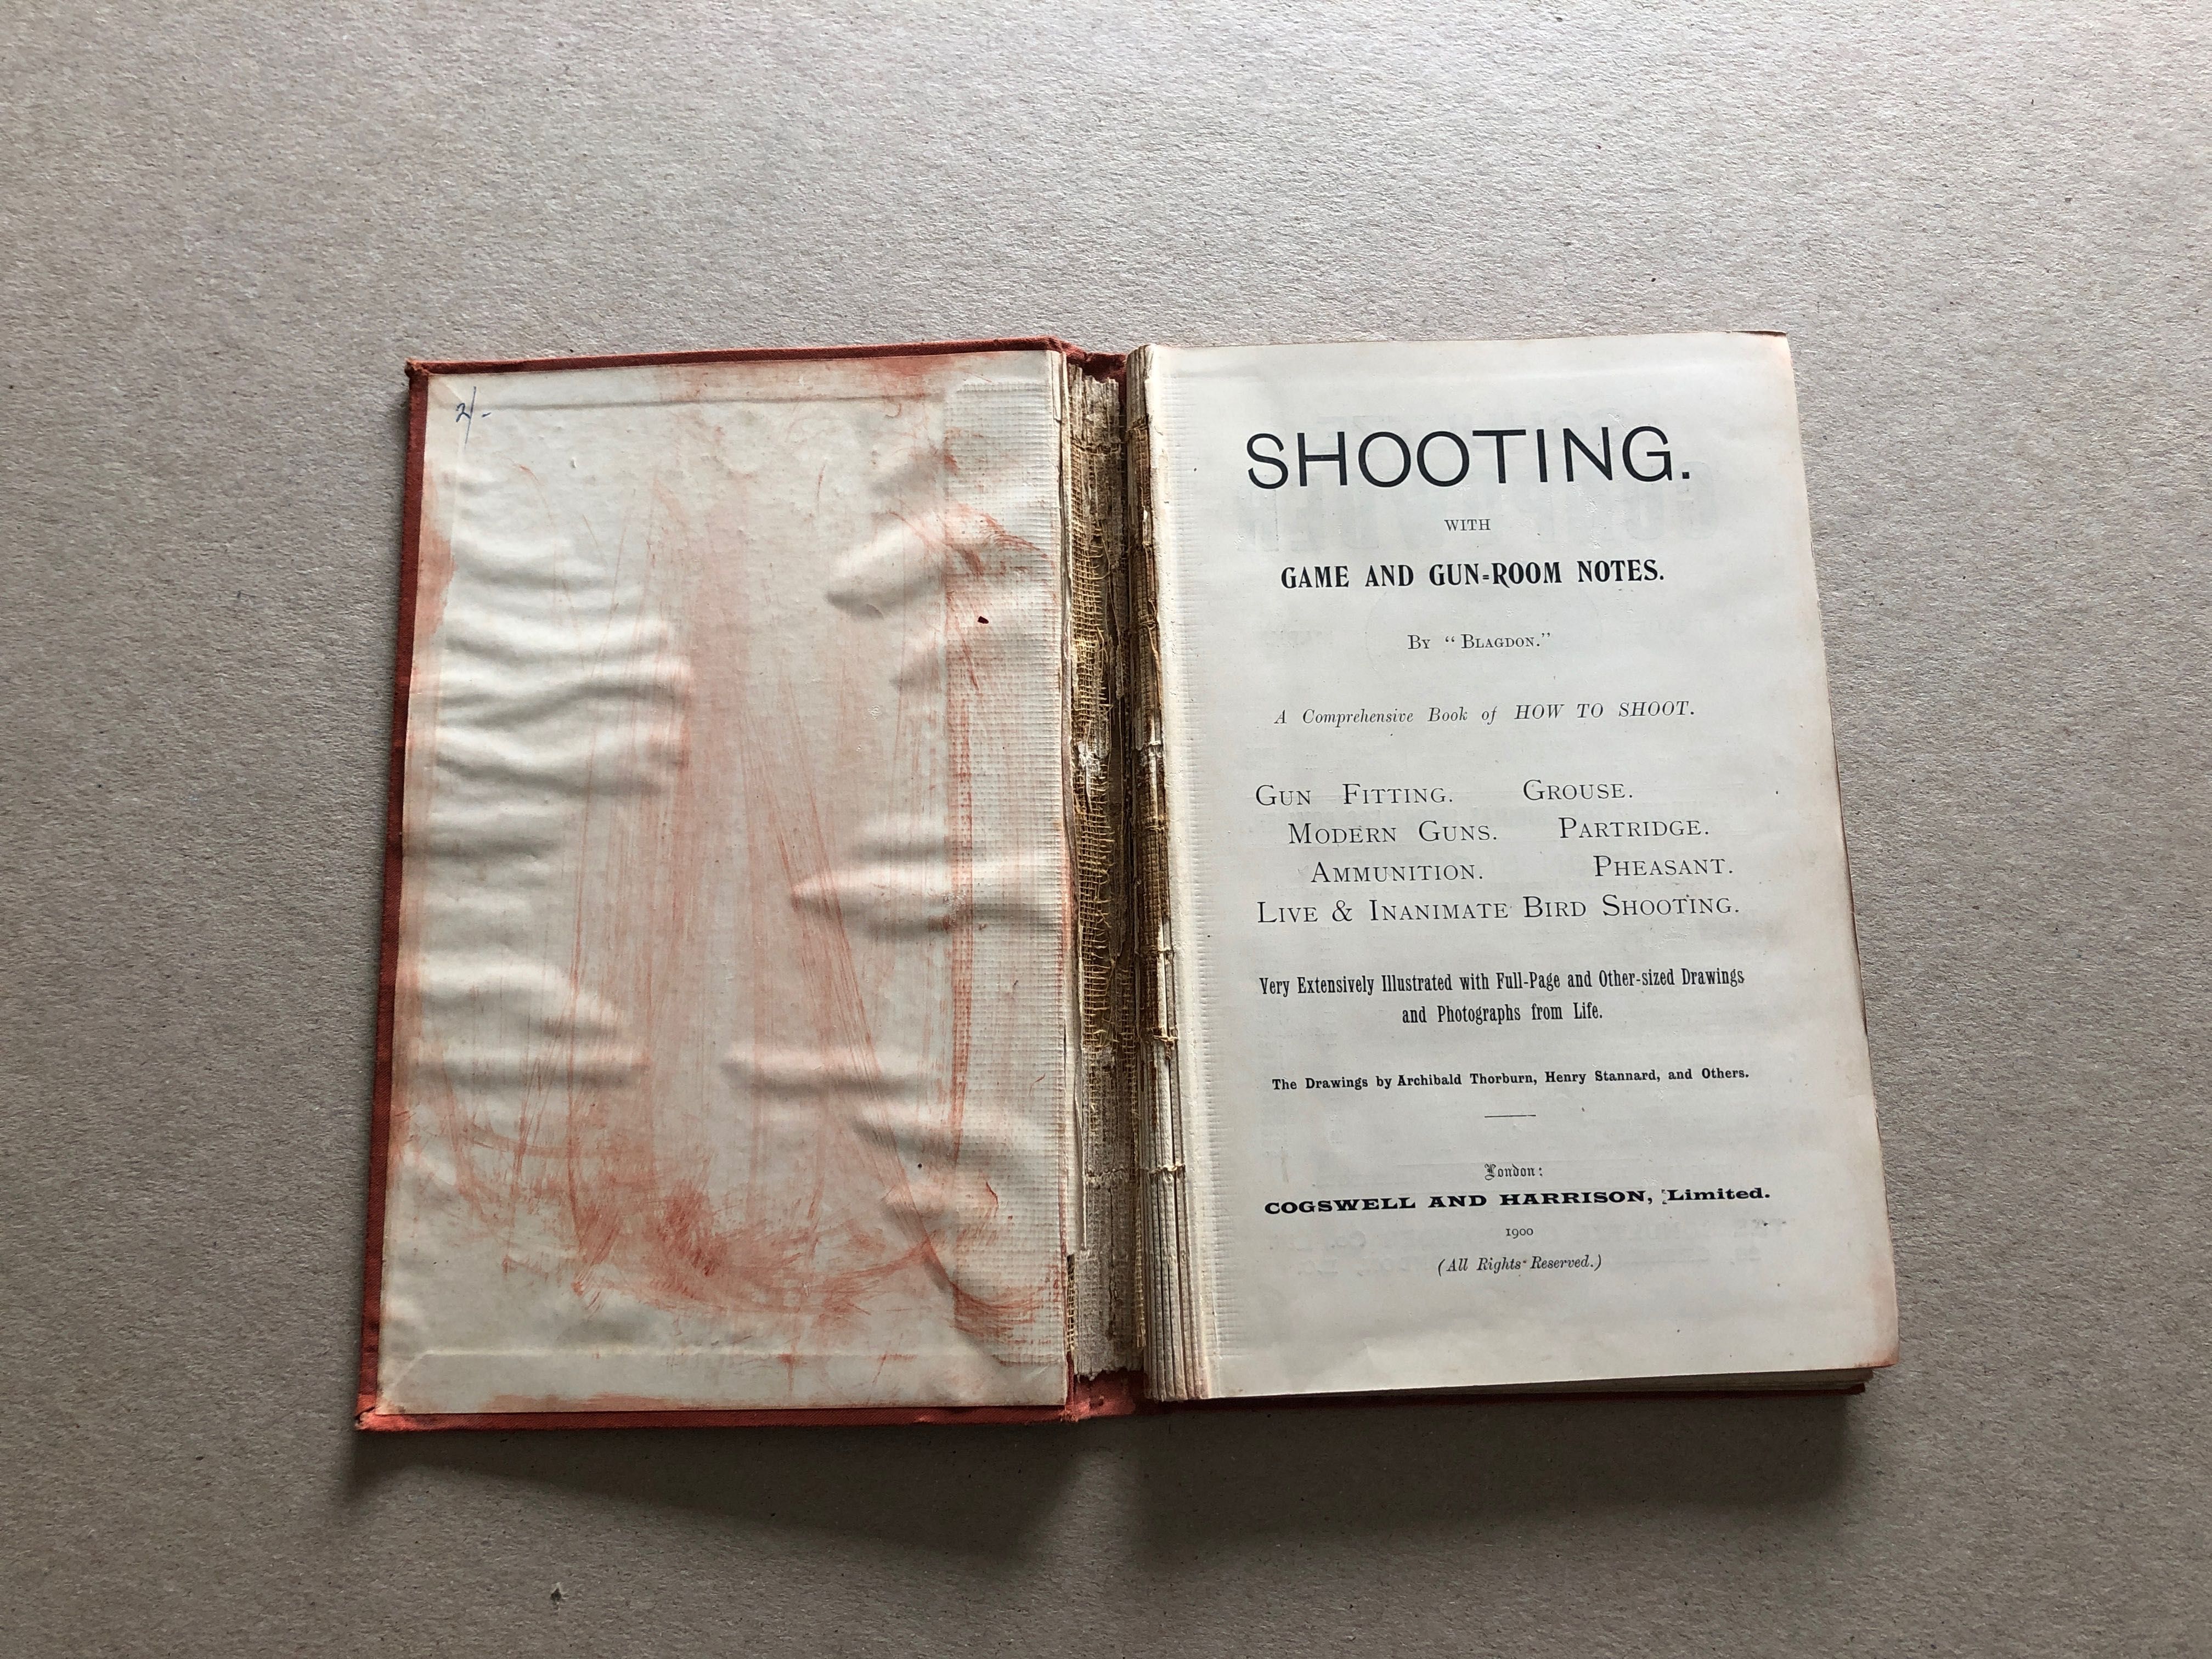 Shooting. With game and gun-room notes.